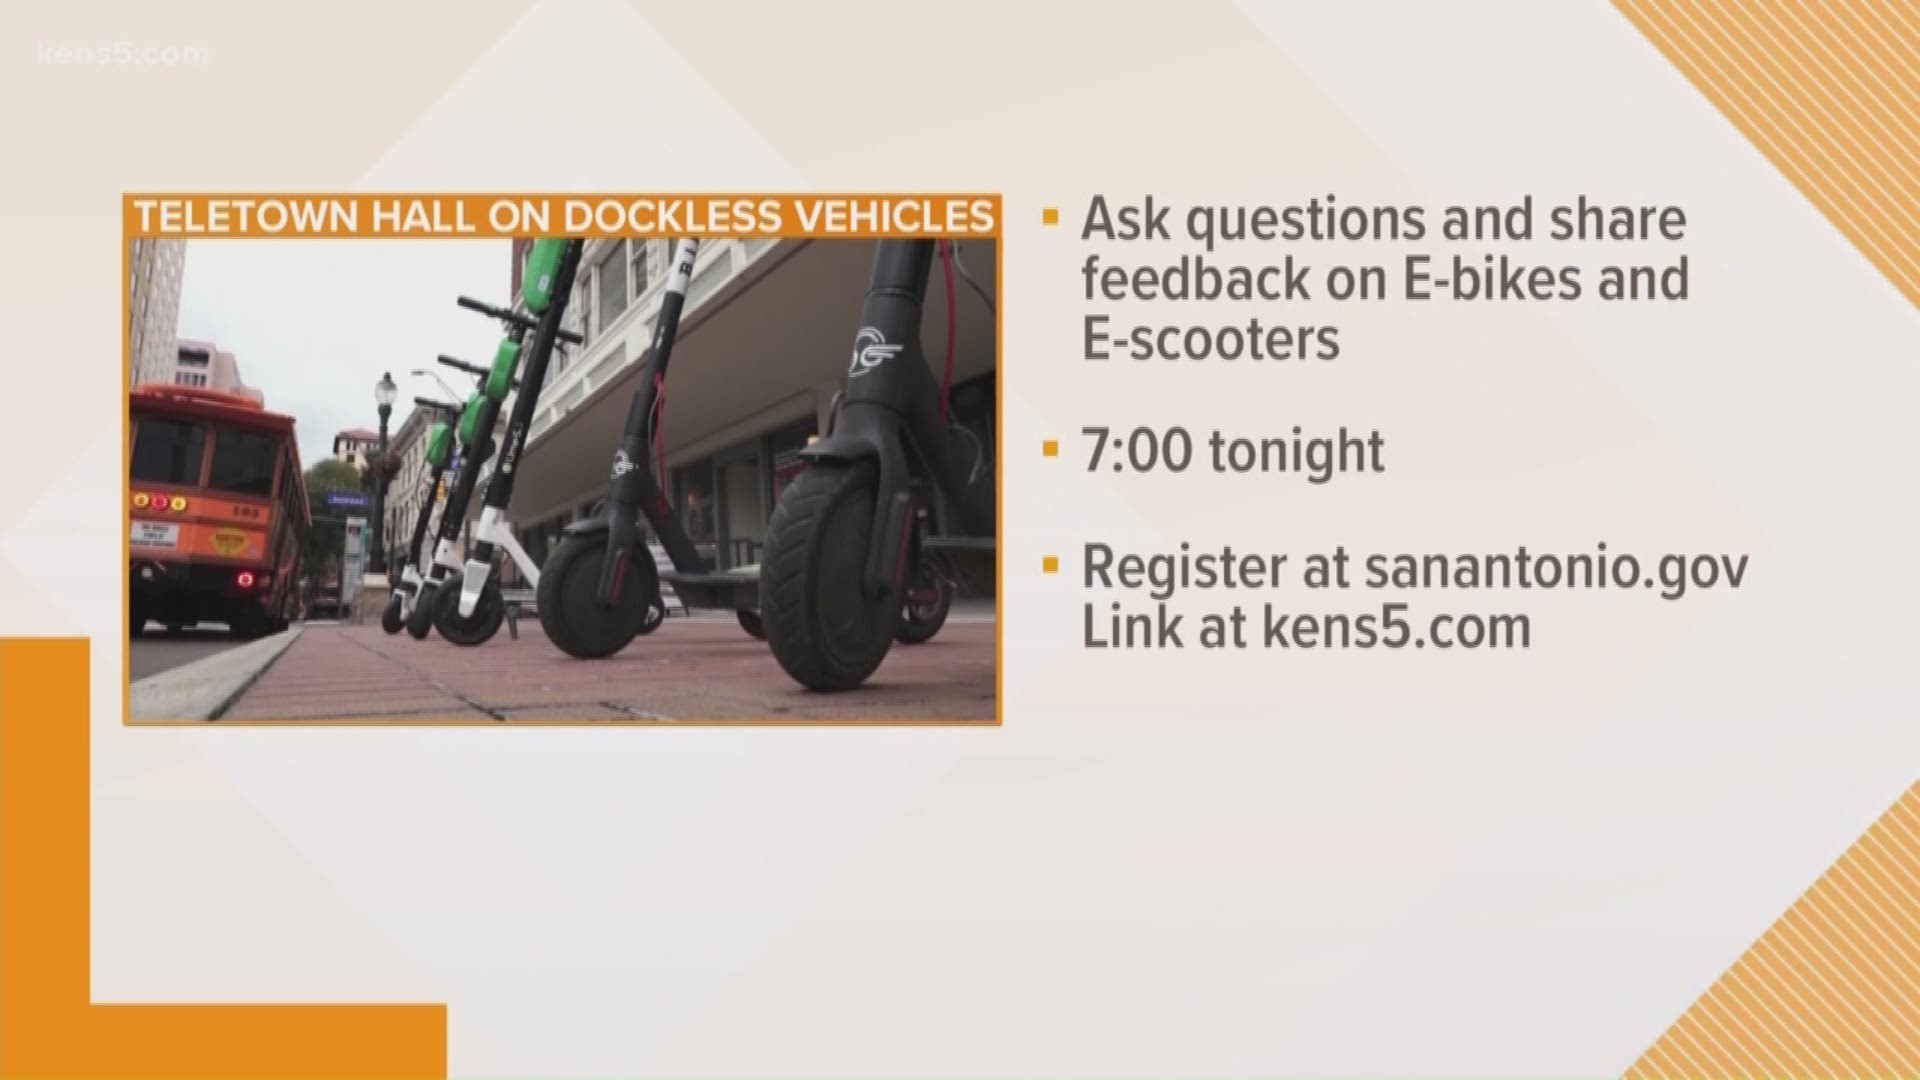 The City of San Antonio wants to know what you think about dockless vehicles. A Telephone Town Hall will be held tonight at 7 p.m.